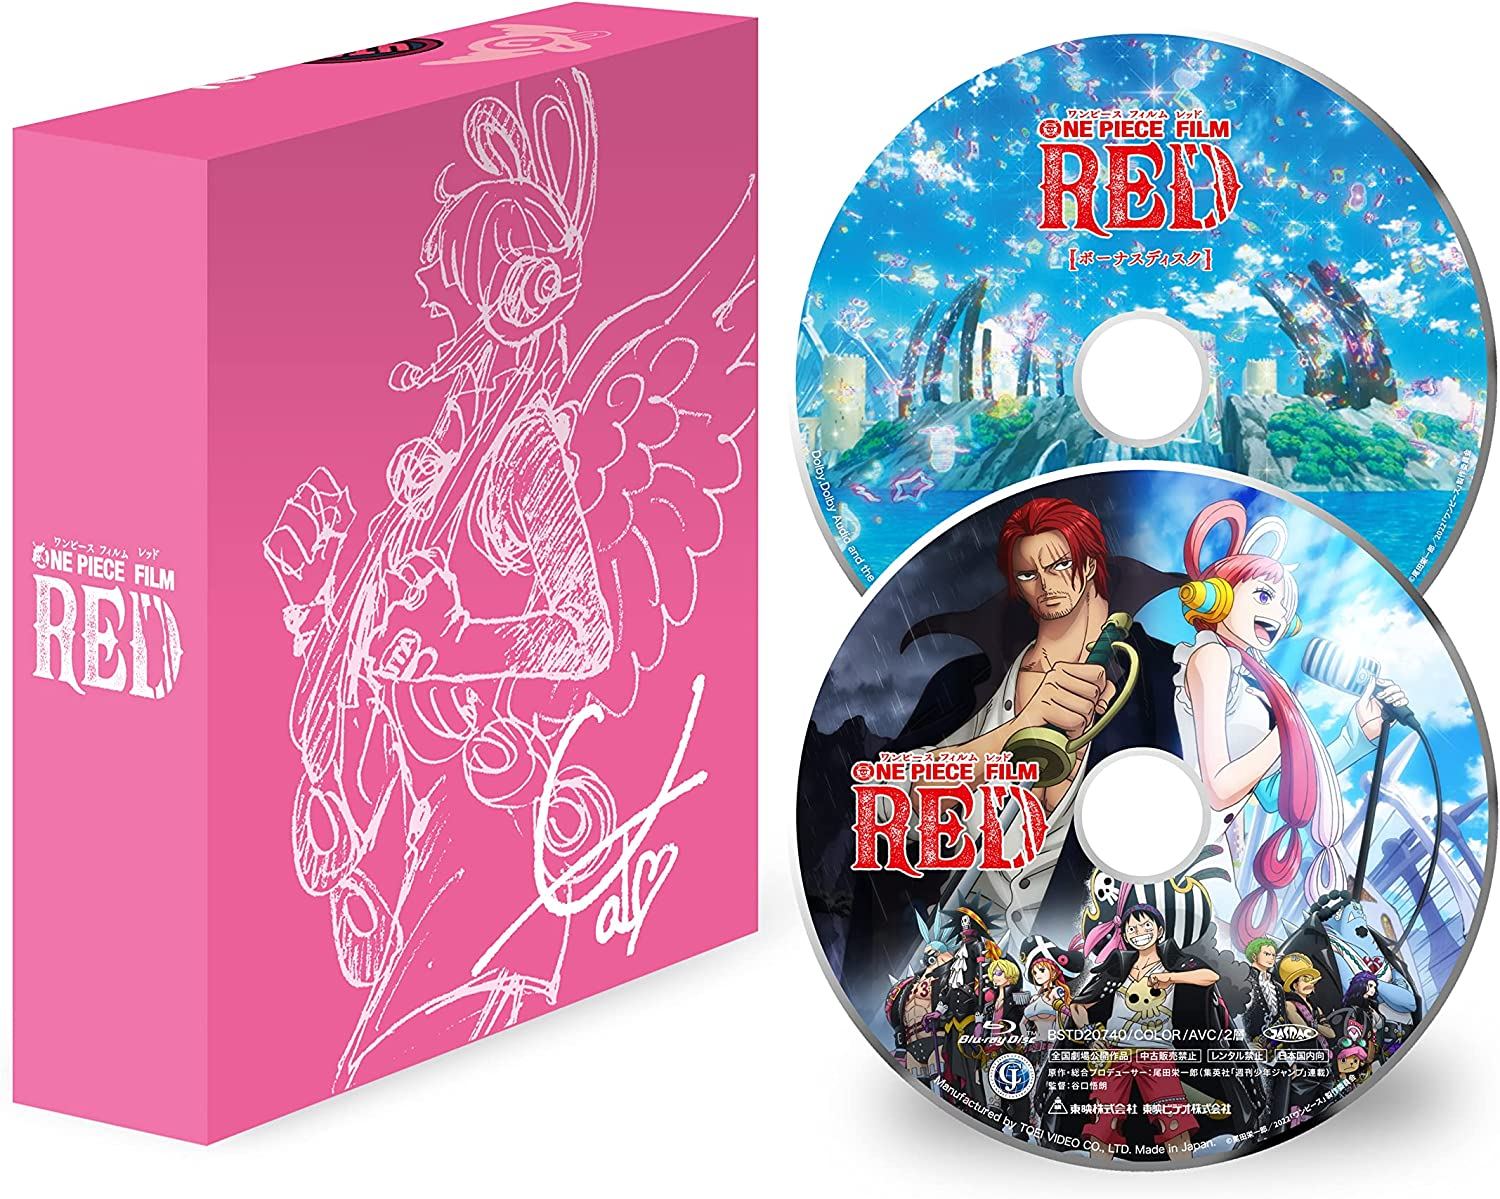 One Piece Film Red [Limited Edition]